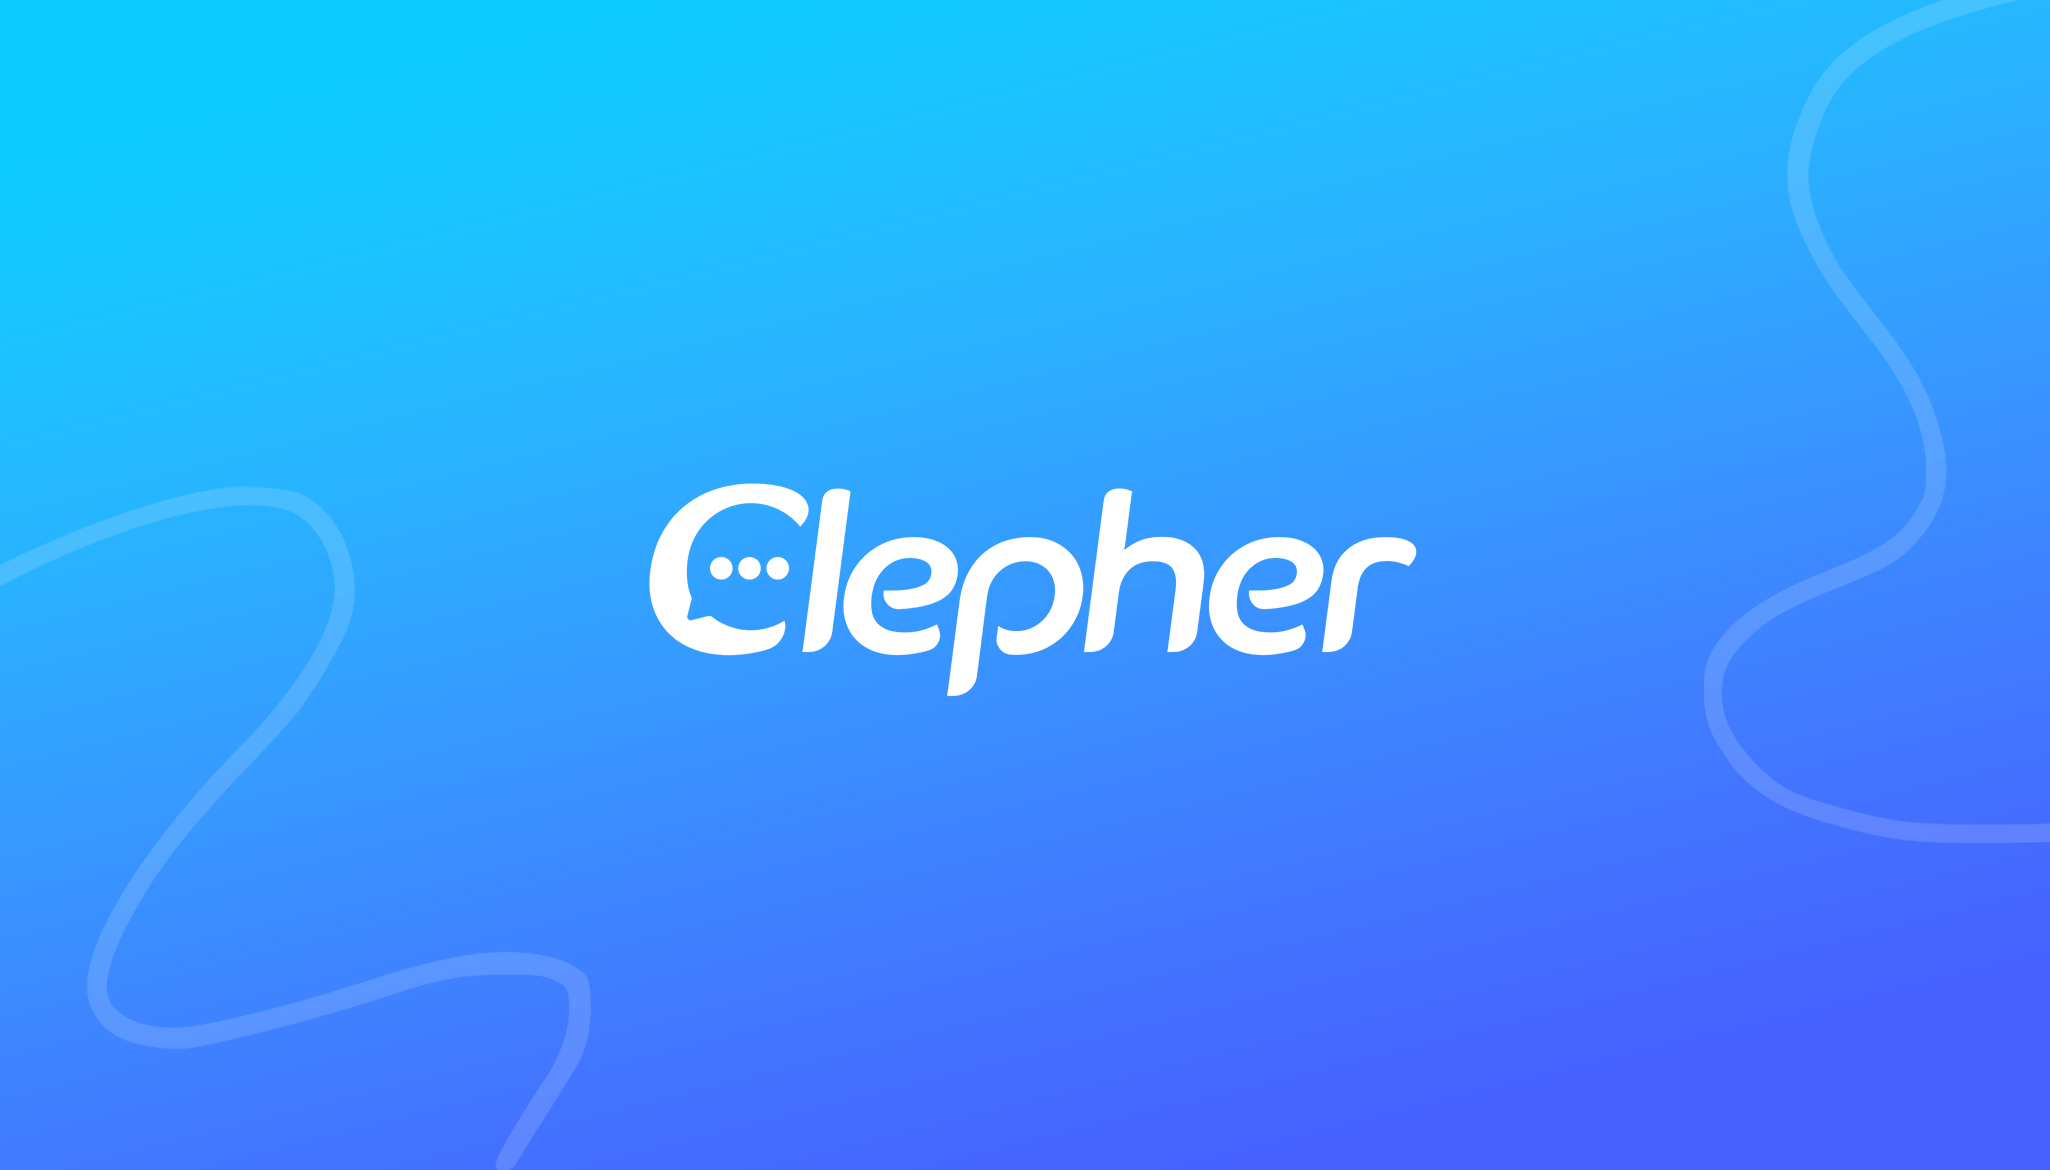 Lead Qualification Chatbots & Qualify Leads with Clepher!